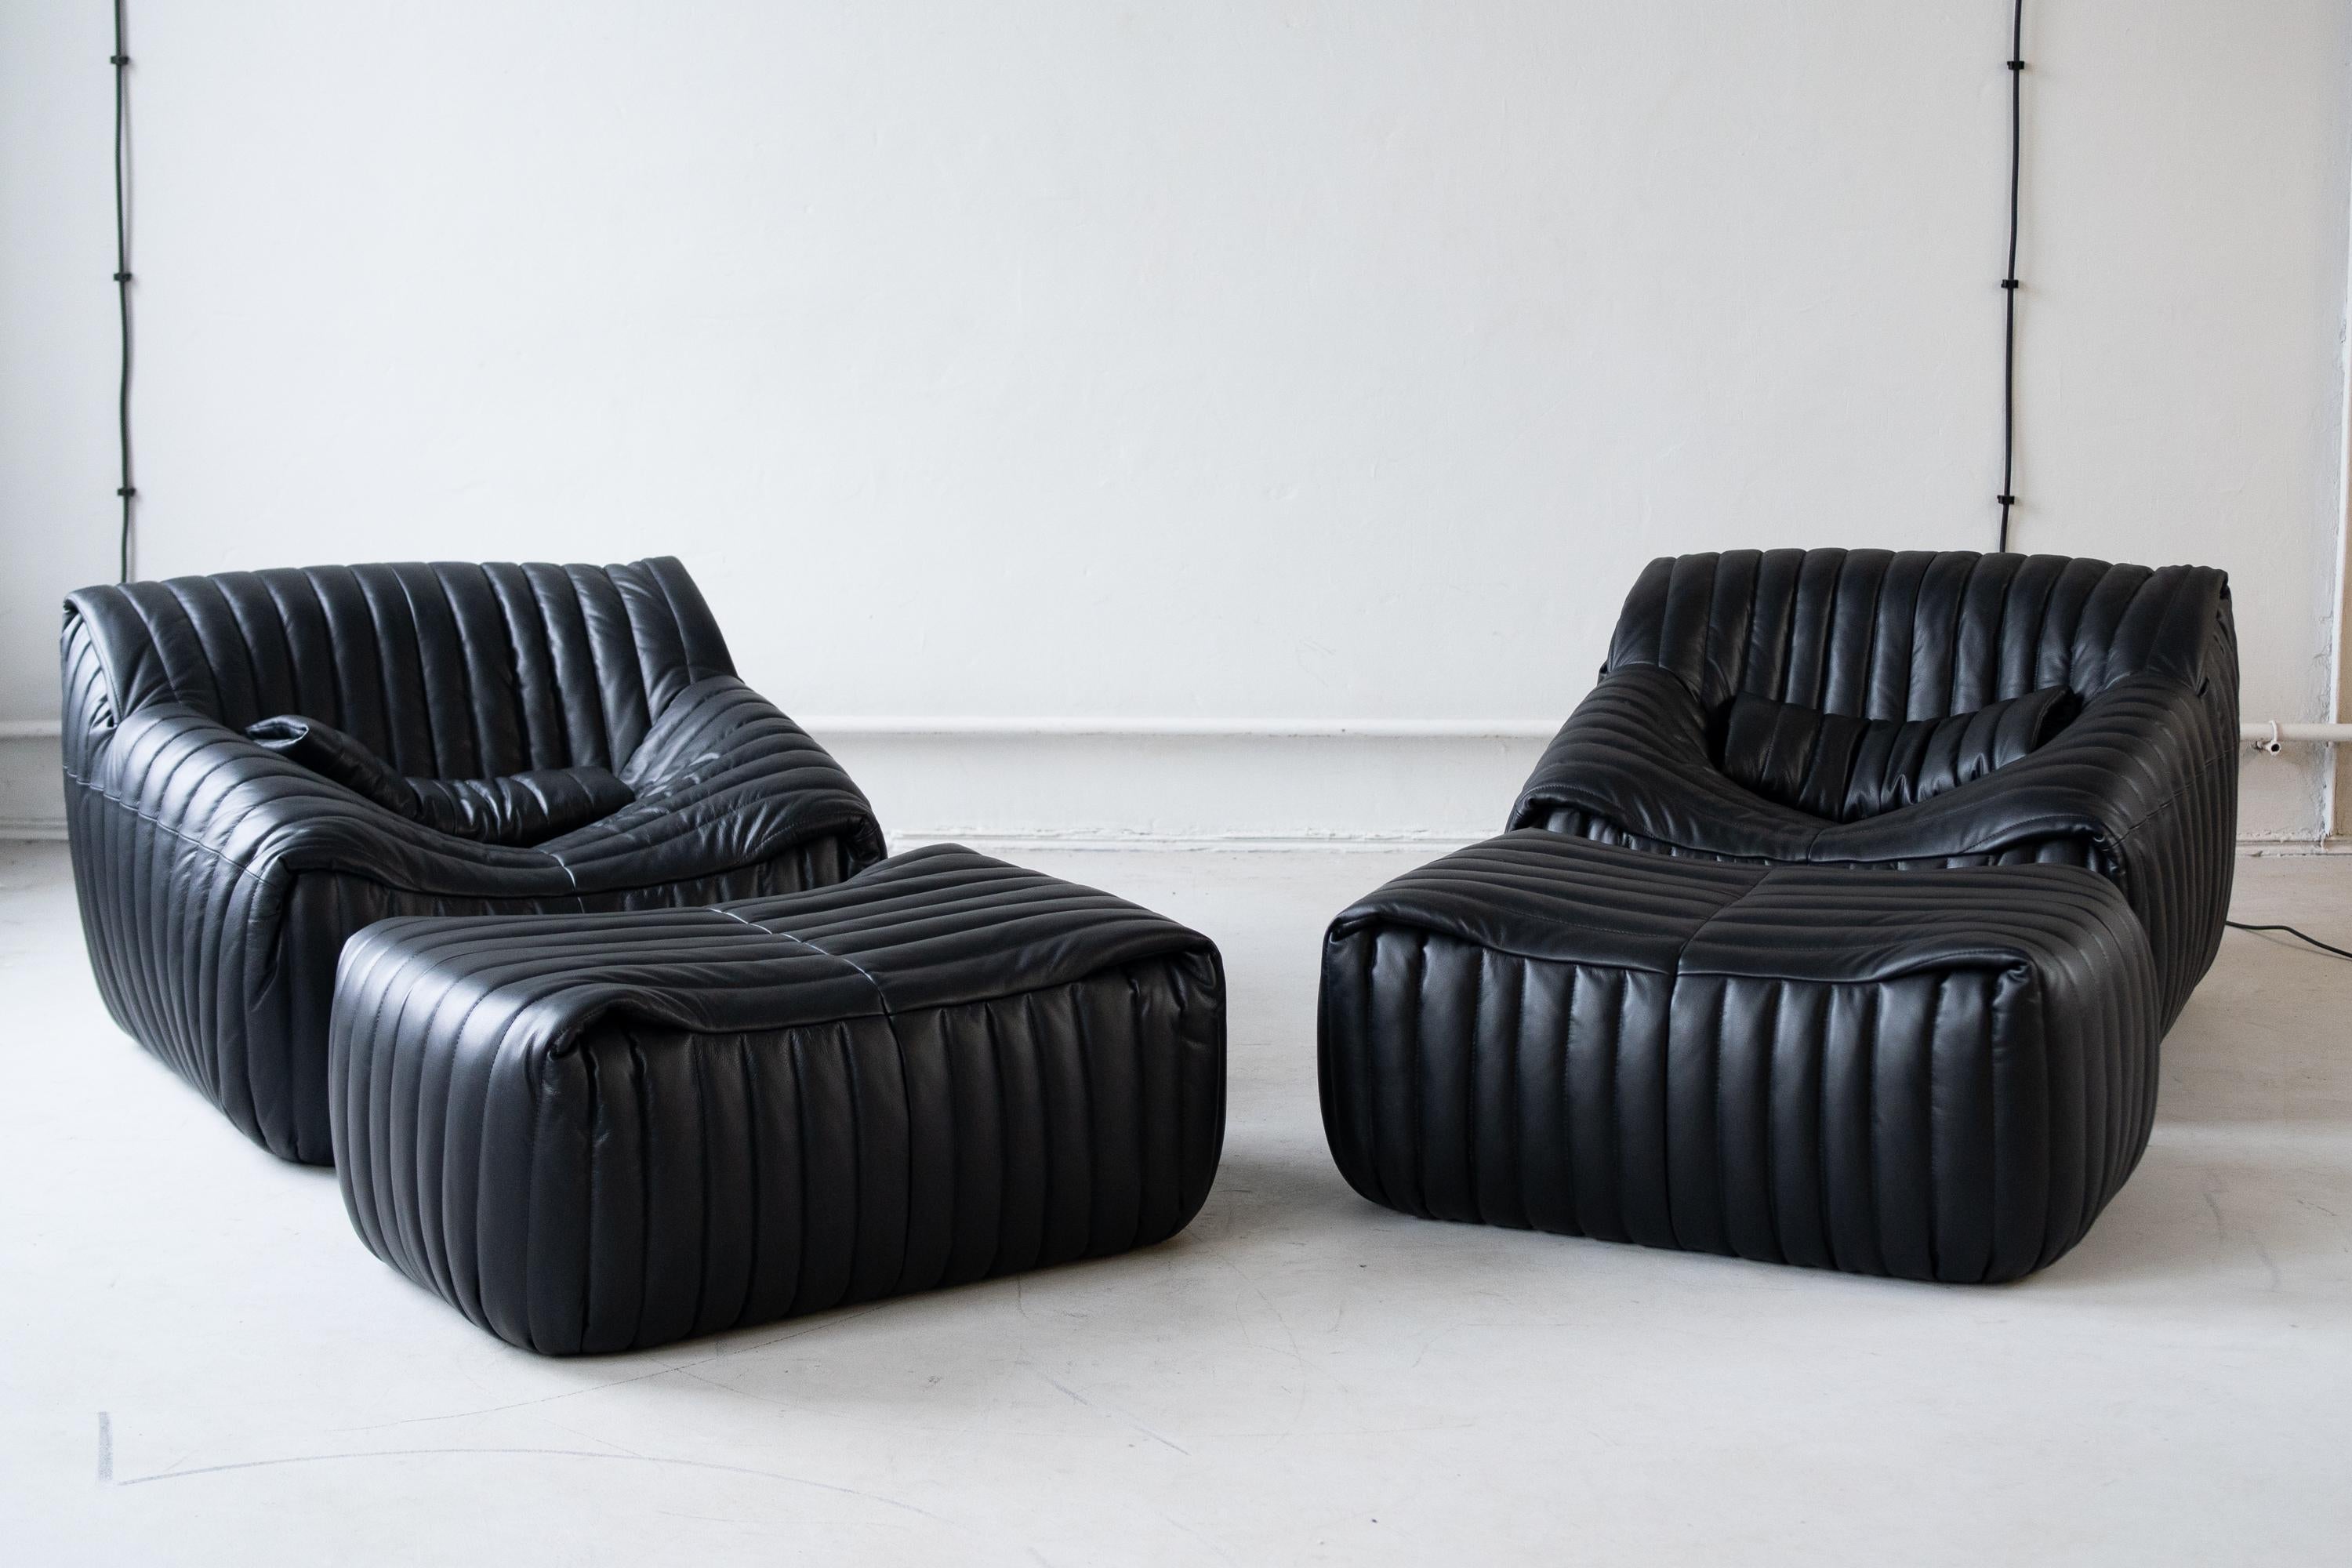  Sandra sofa  designed by Annie Hiéronimus for Cinna after she joined the Roset Bureau d’Etudes in 1976. 
 The inside of the sofa consists entirely of polyether foam and is, therefore, feather-light and above all very comfortable. 
this set is